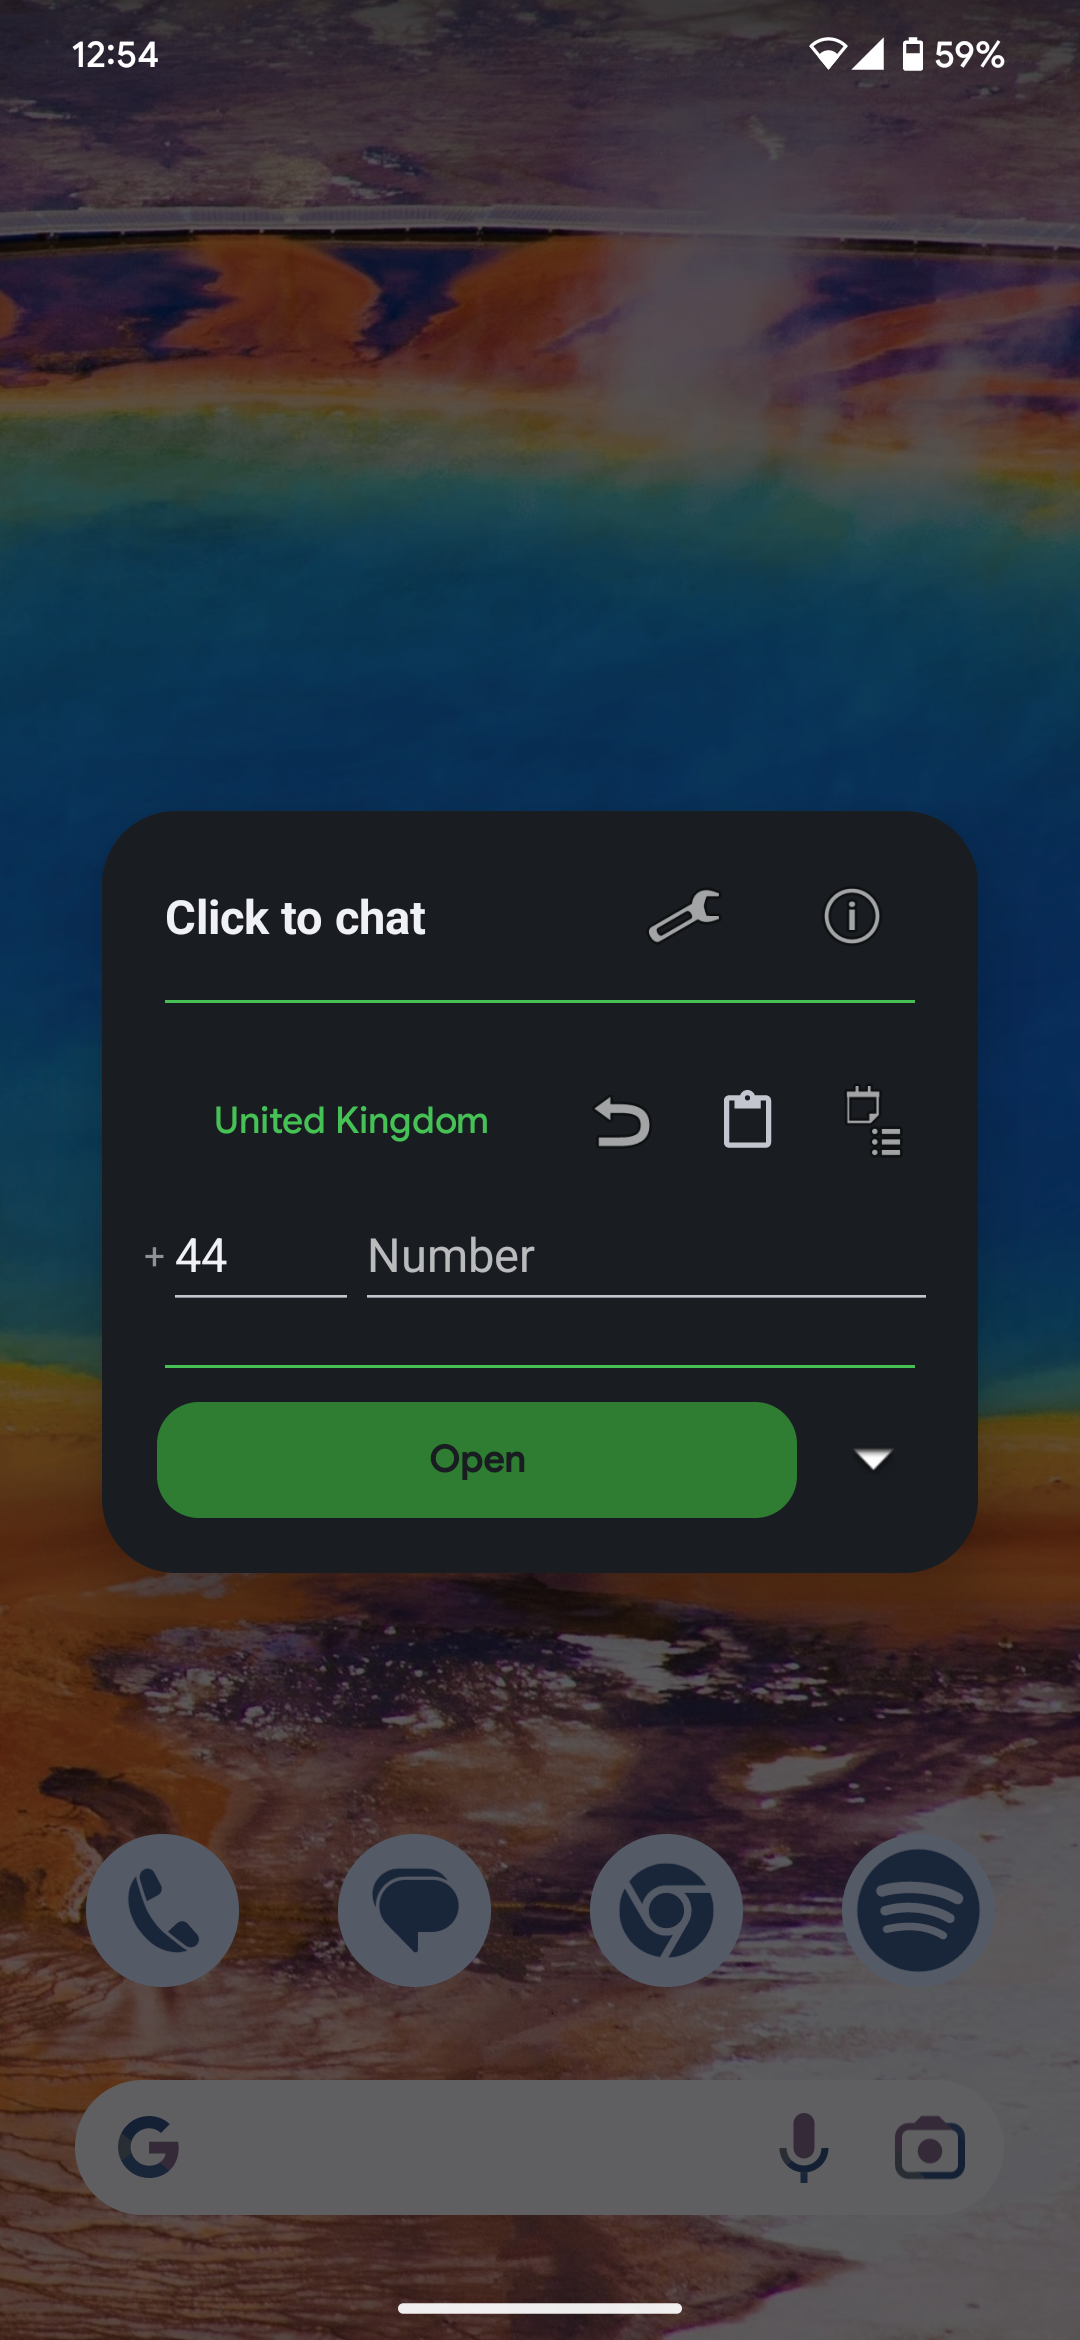 screenshot of click to chat's pop up window